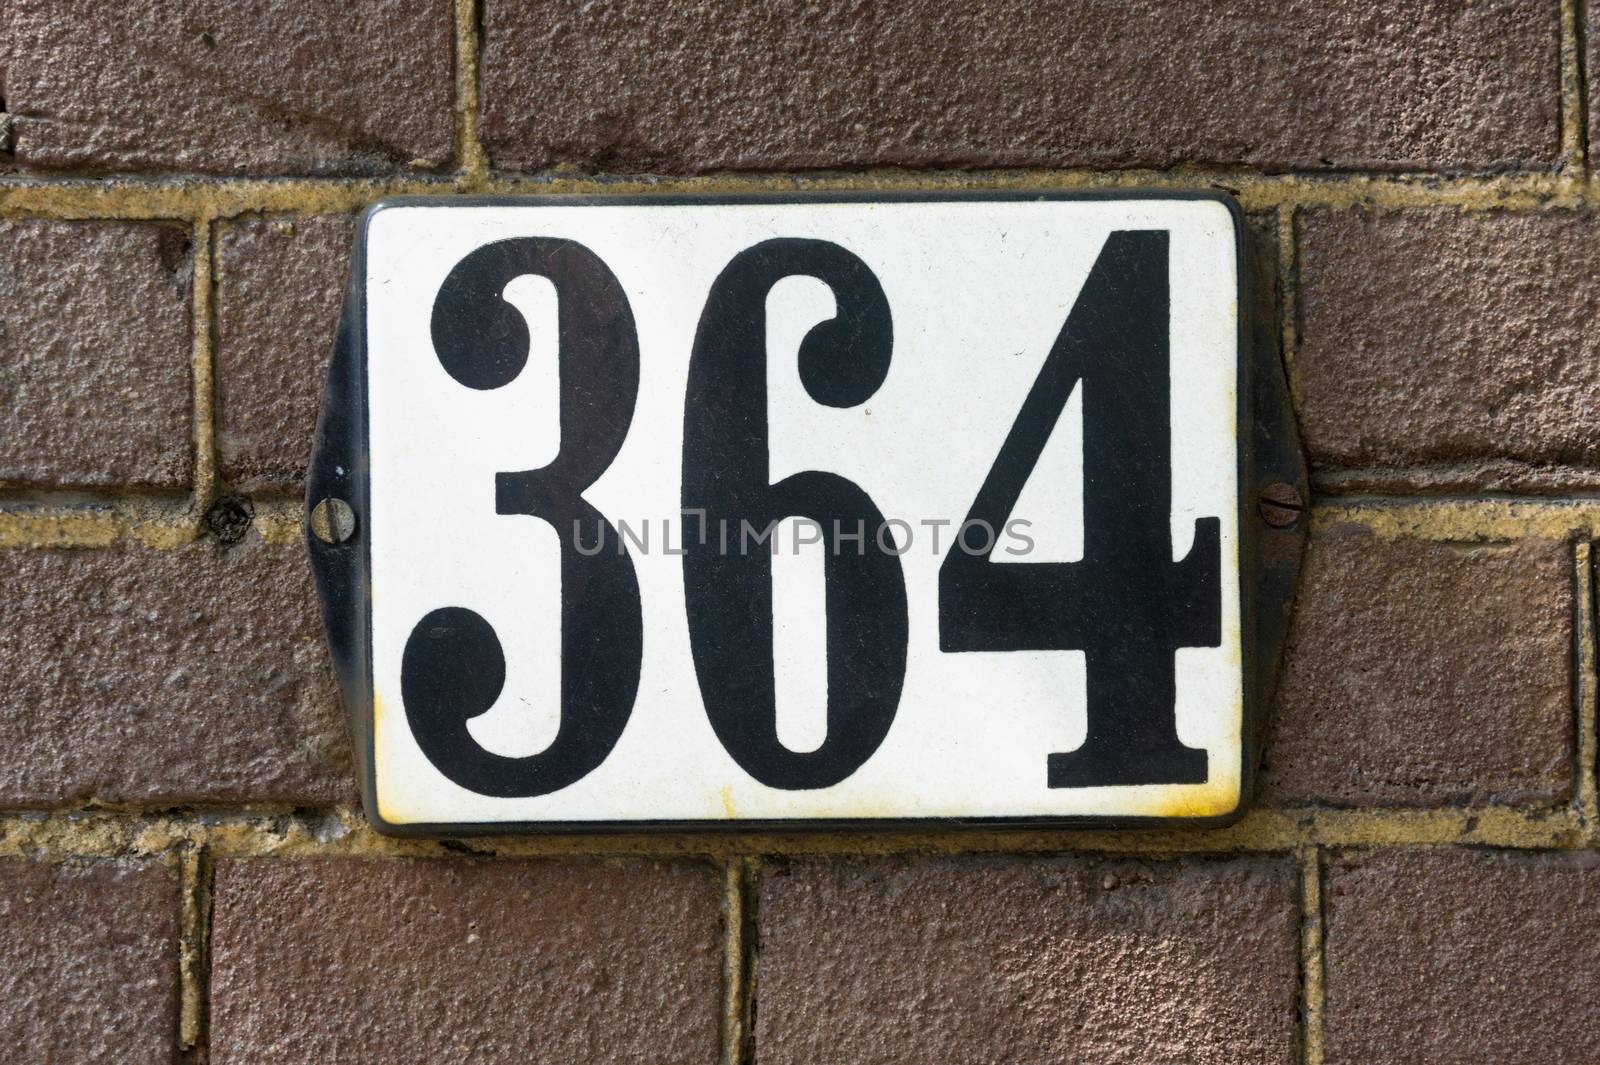 House number thee hundred and sixty four (364)